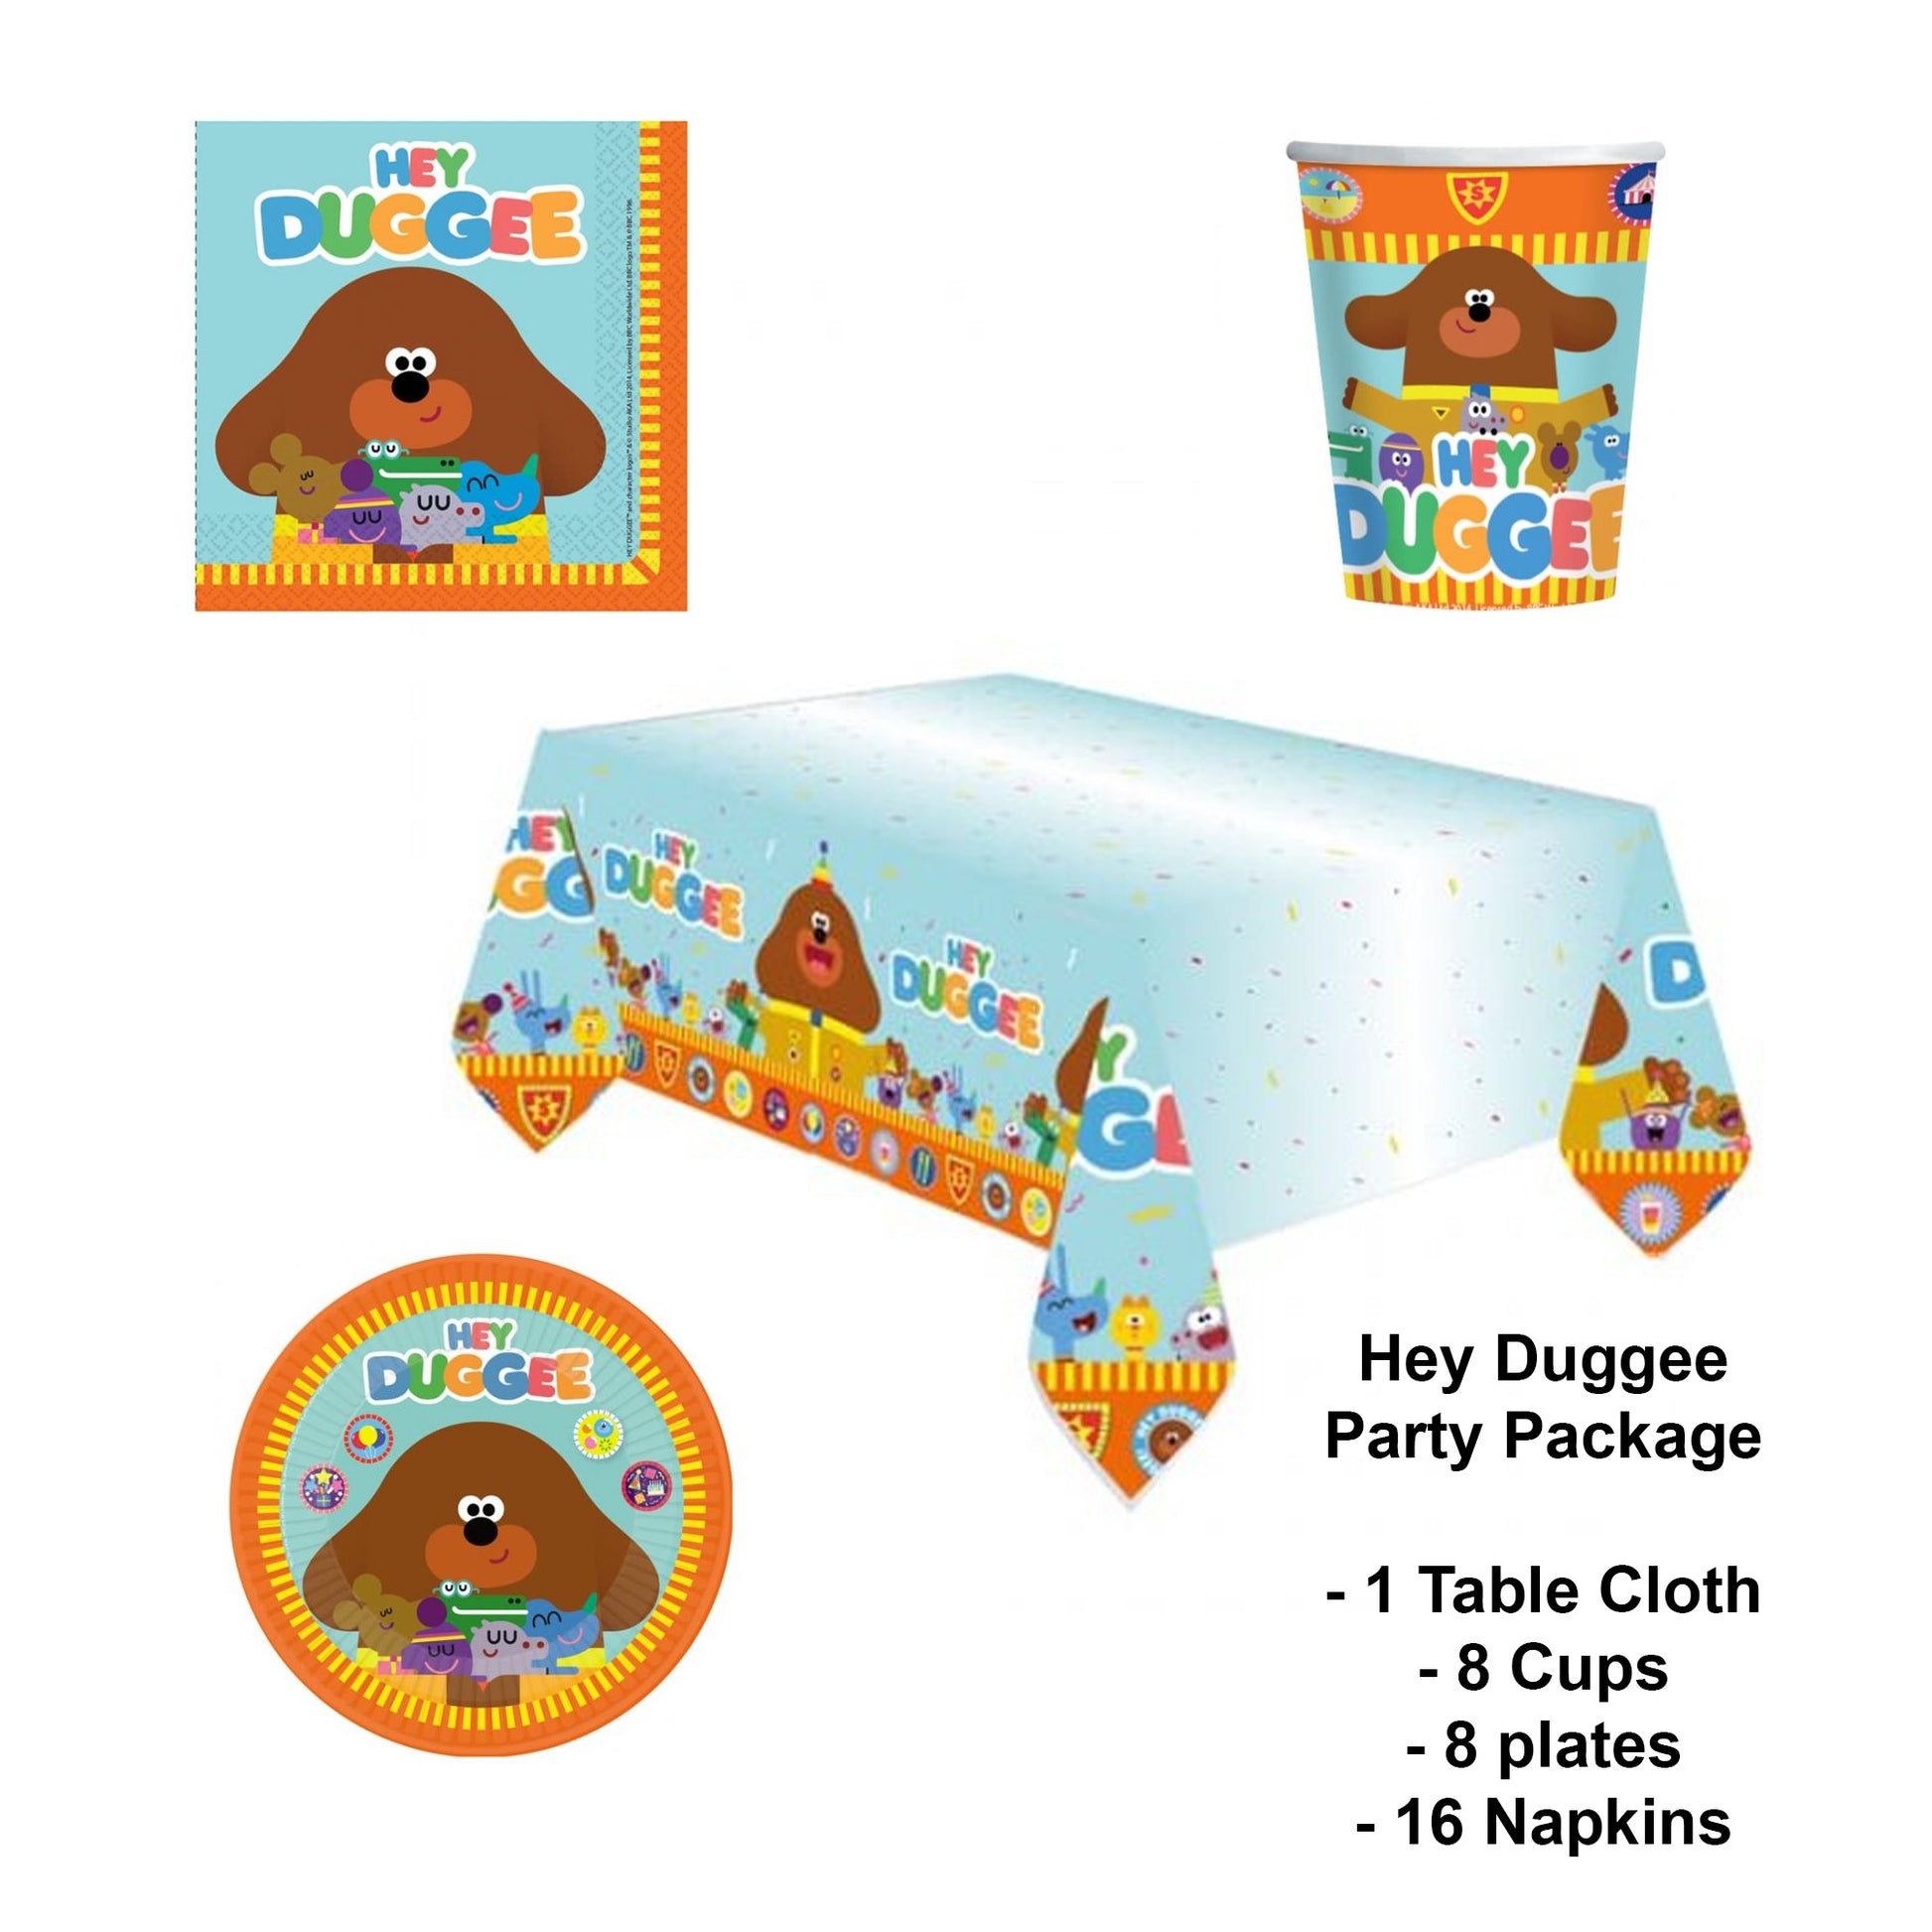 Hey Duggee Party Package - Tablecloth, Plates, Cups, and Napkins for 8 People